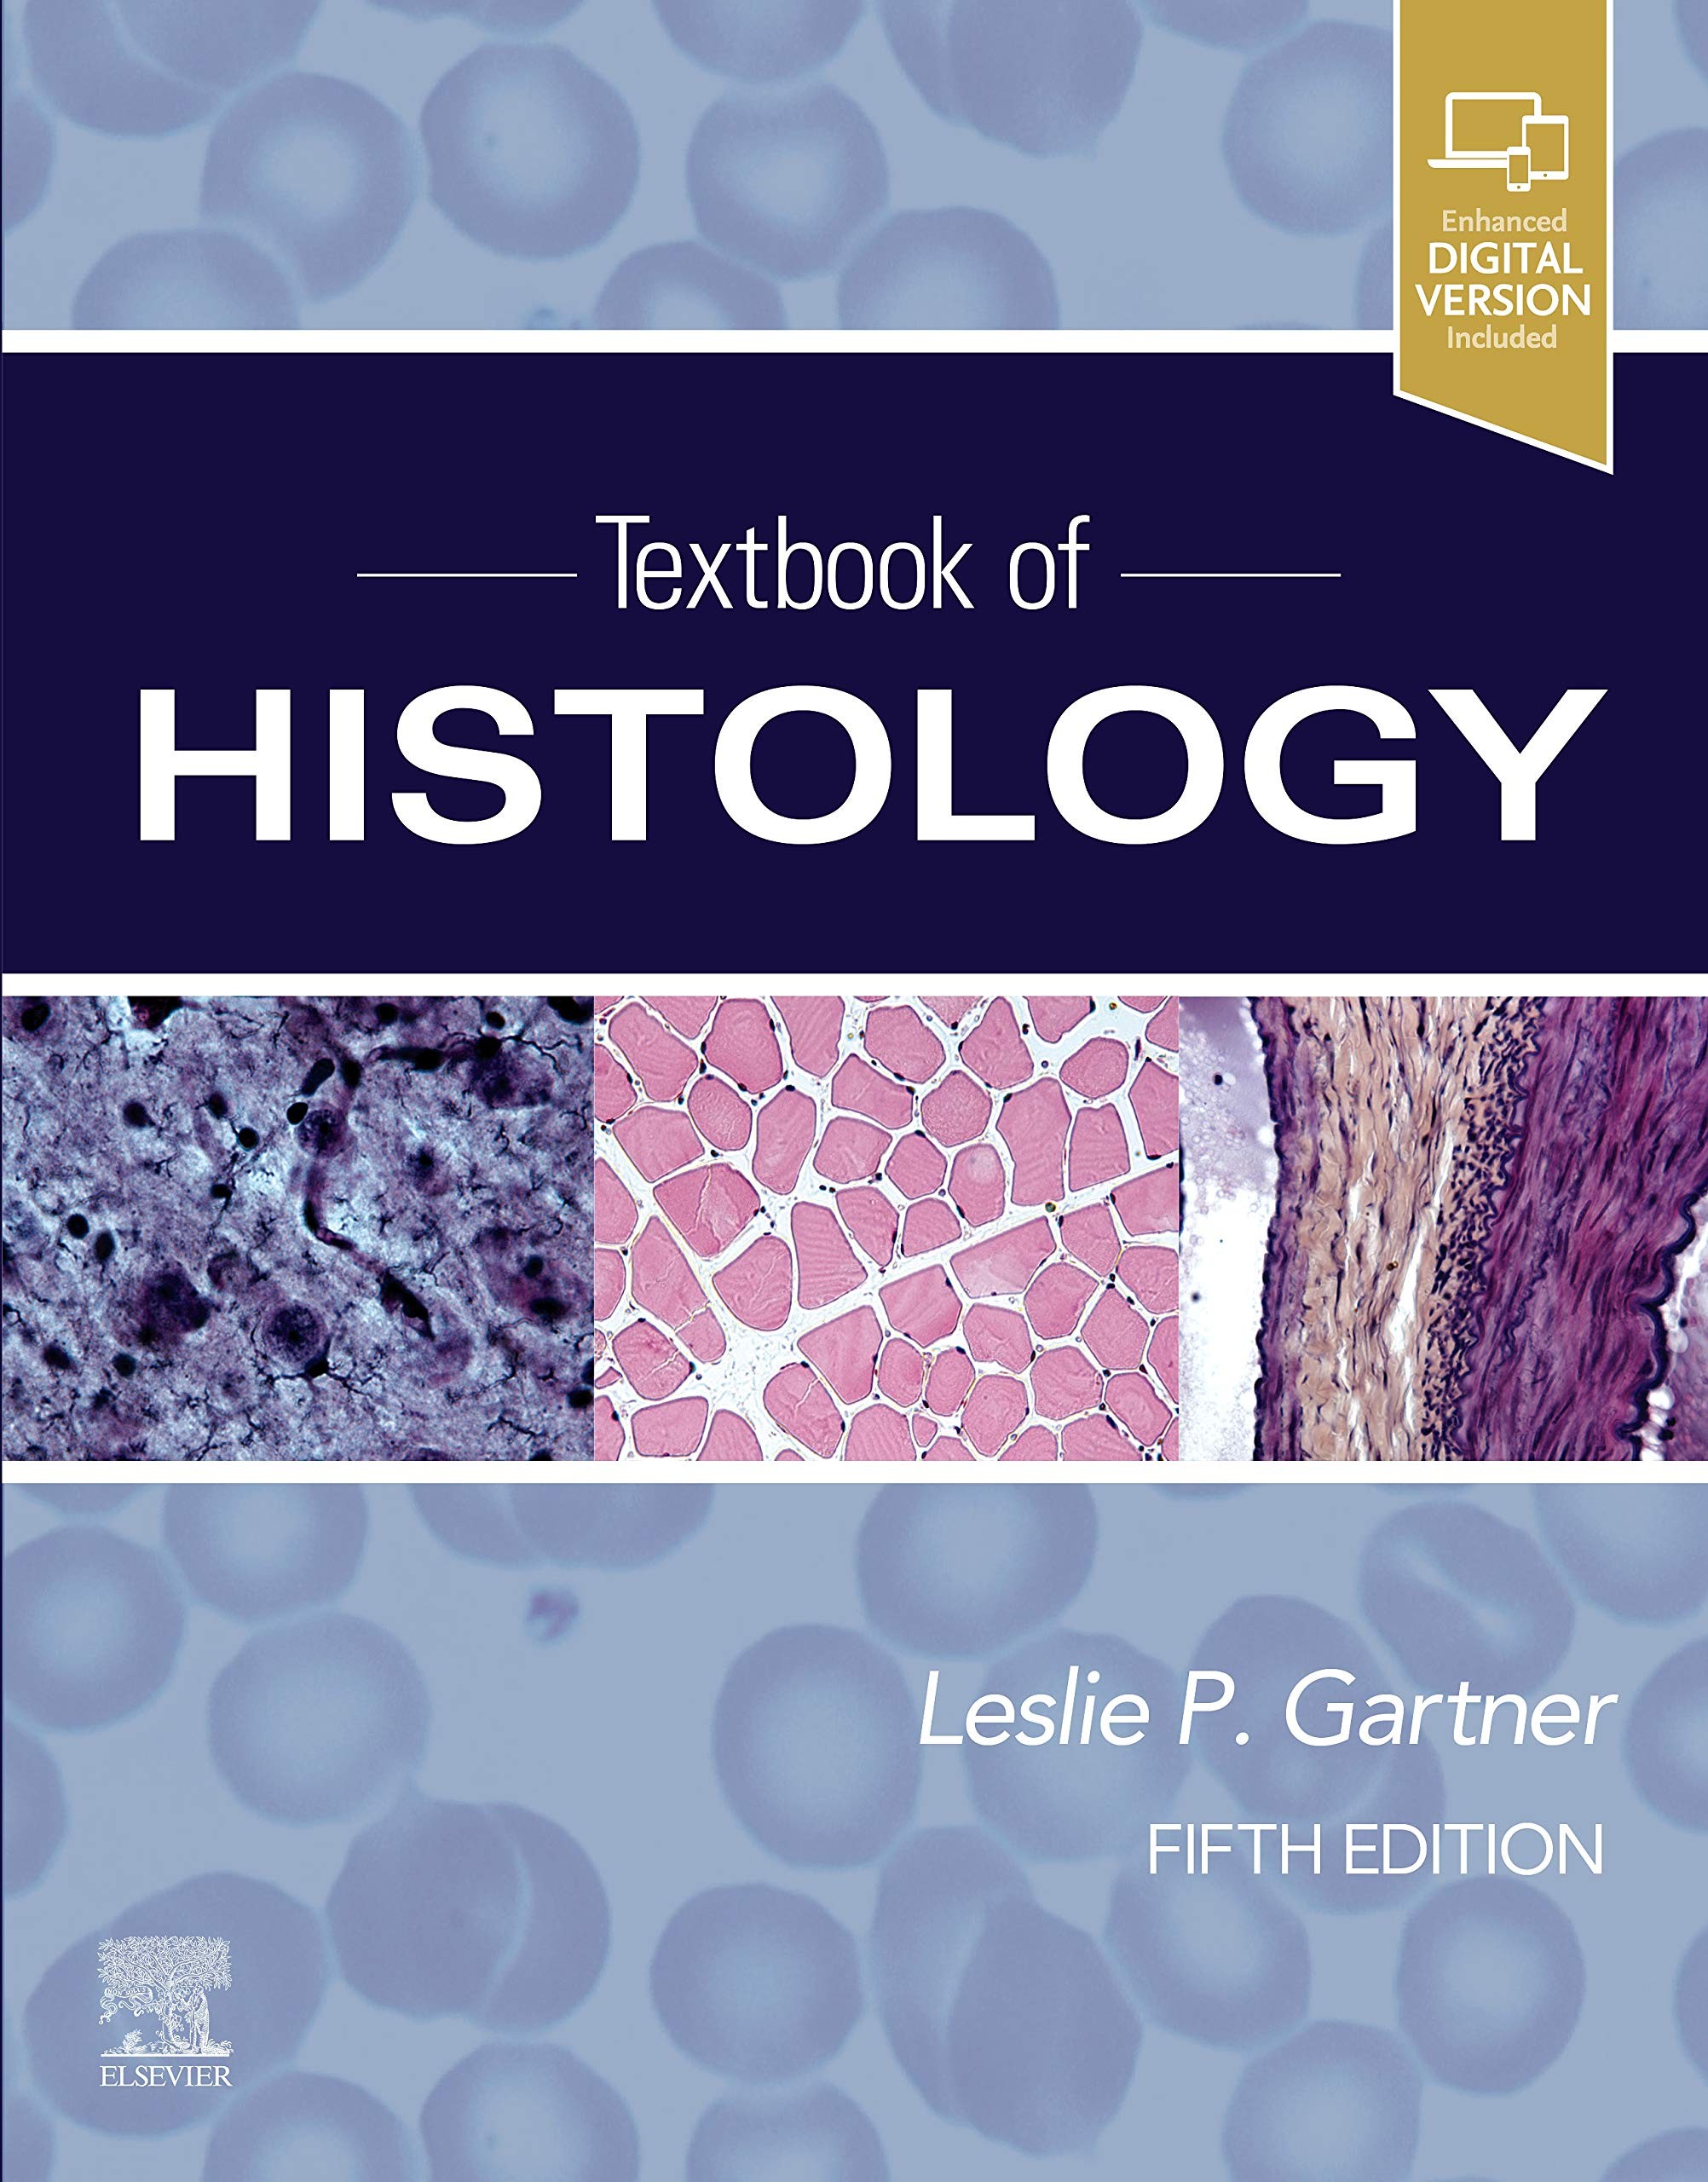 Textbook of Histology, 5 edition